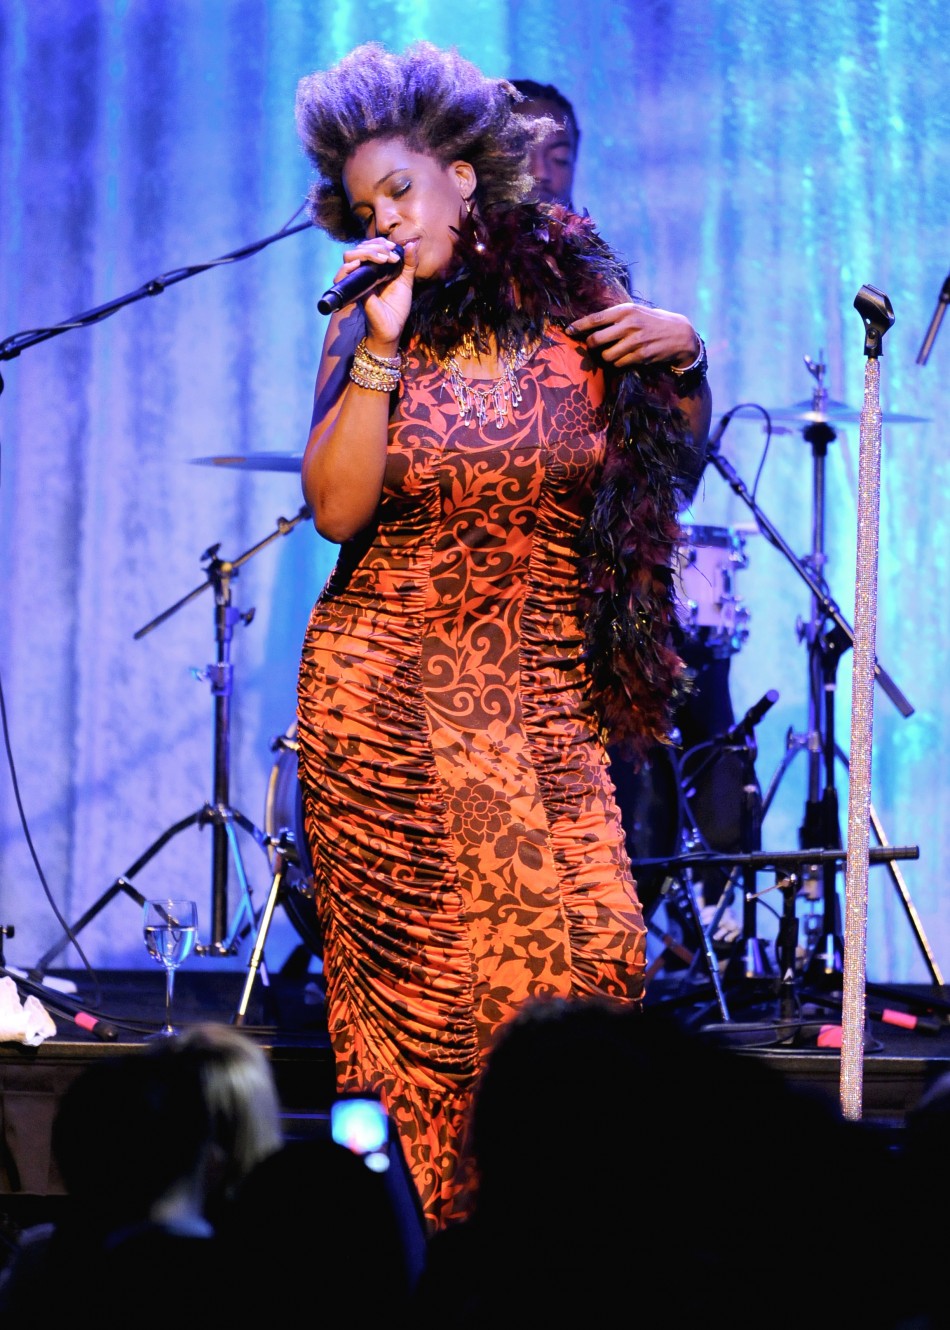 Singer Macy Gray performs at quotThe Advocate 45thquot celebrating the magazines 45 years of publication in Beverly Hills